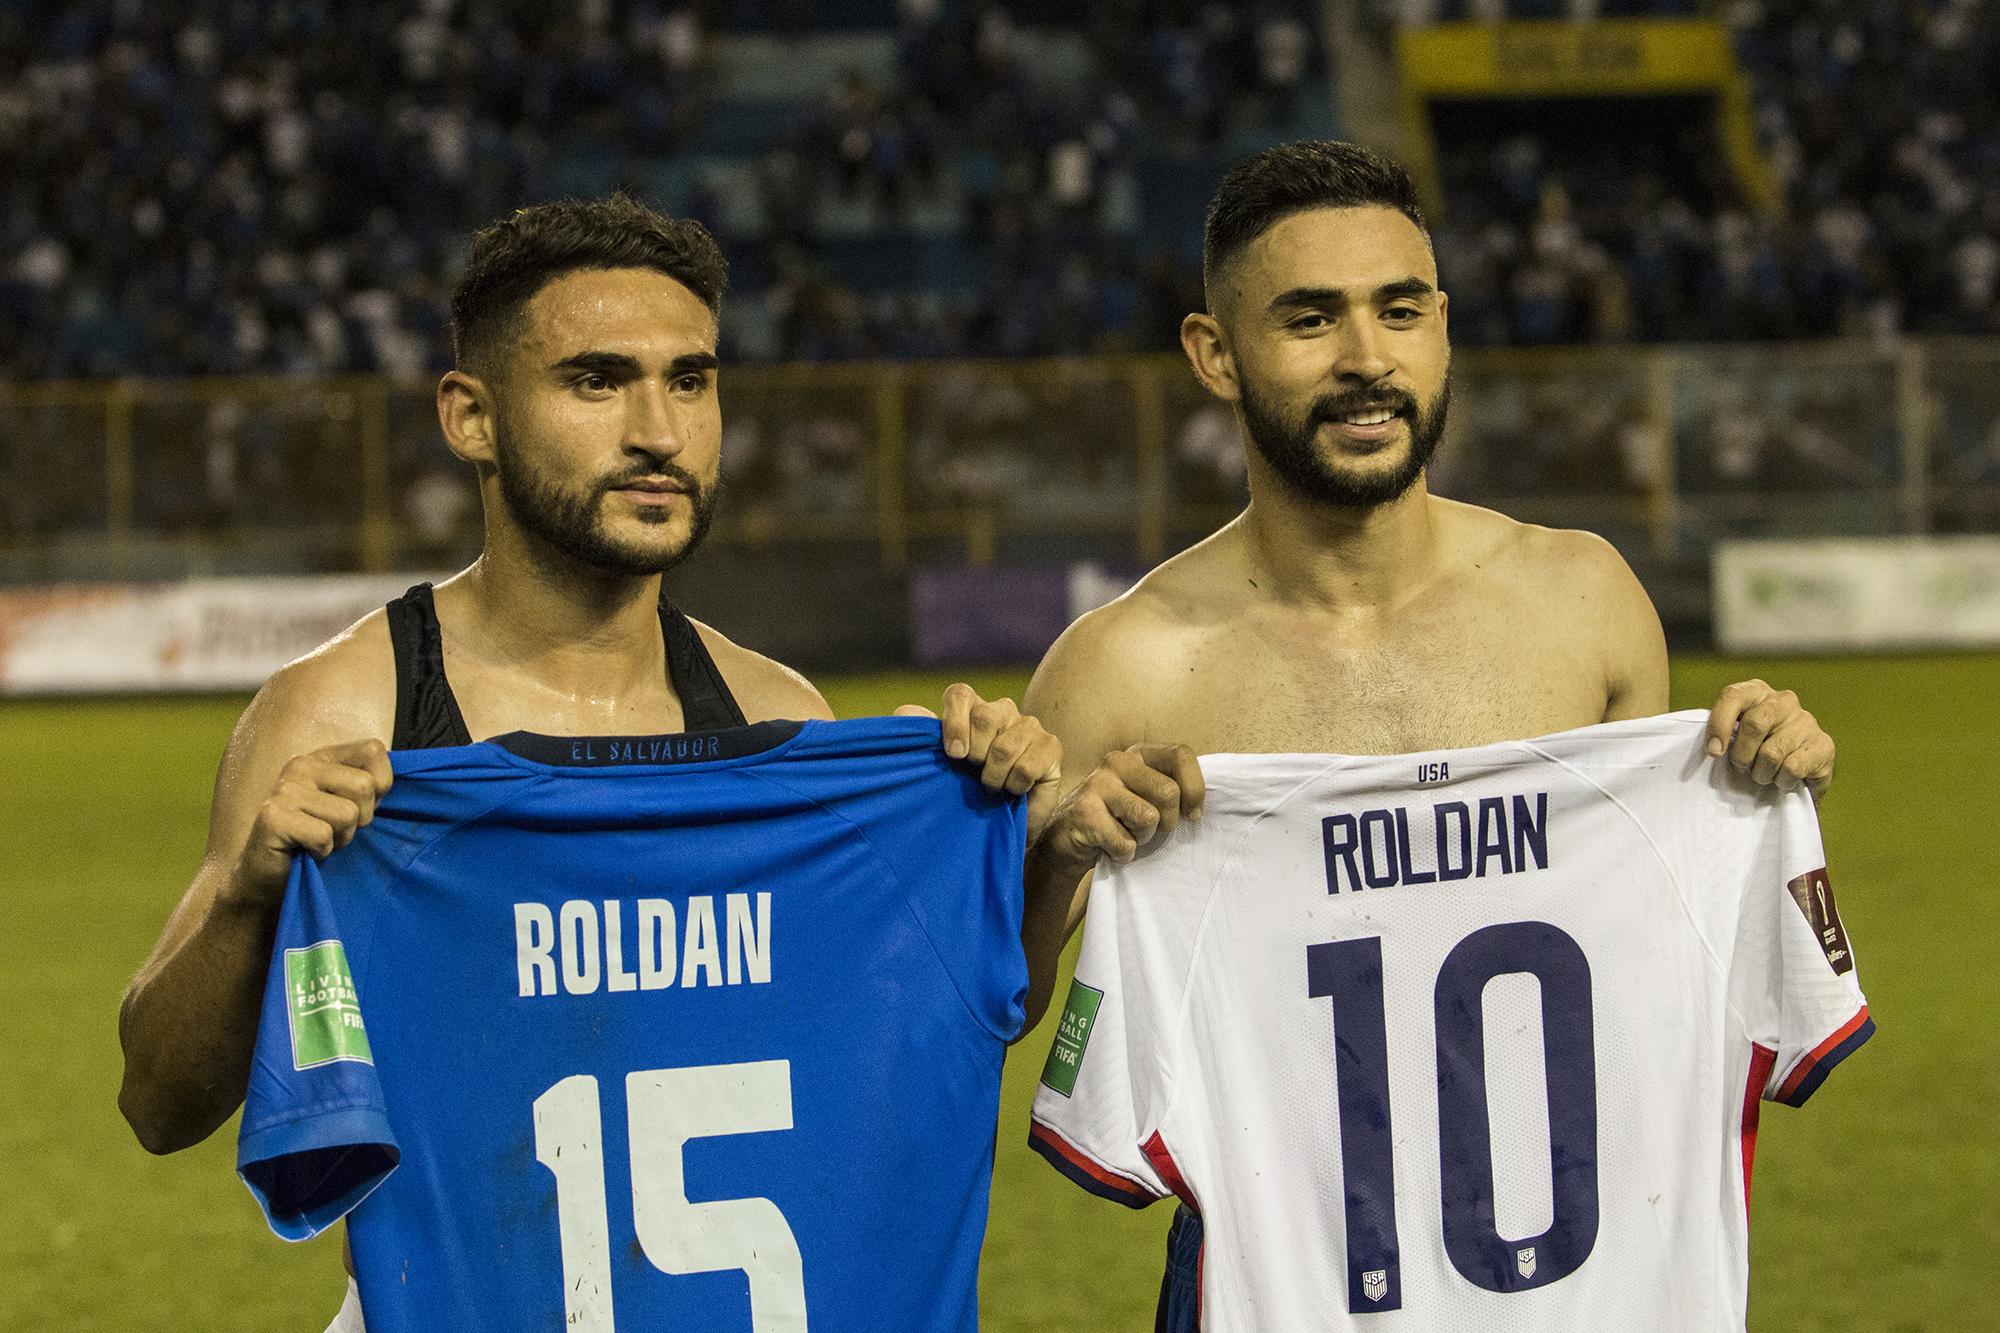 Brothers Cristian (left) and Alex Roldán exchange jerseys after facing off at Cuscatlán Stadium on September 2, 2021. Both were born in California to a Guatemalan father and Salvadoran mother, but Cristian plays for the United States and Alex for El Salvador. Photo: Odir Arriola/El Faro